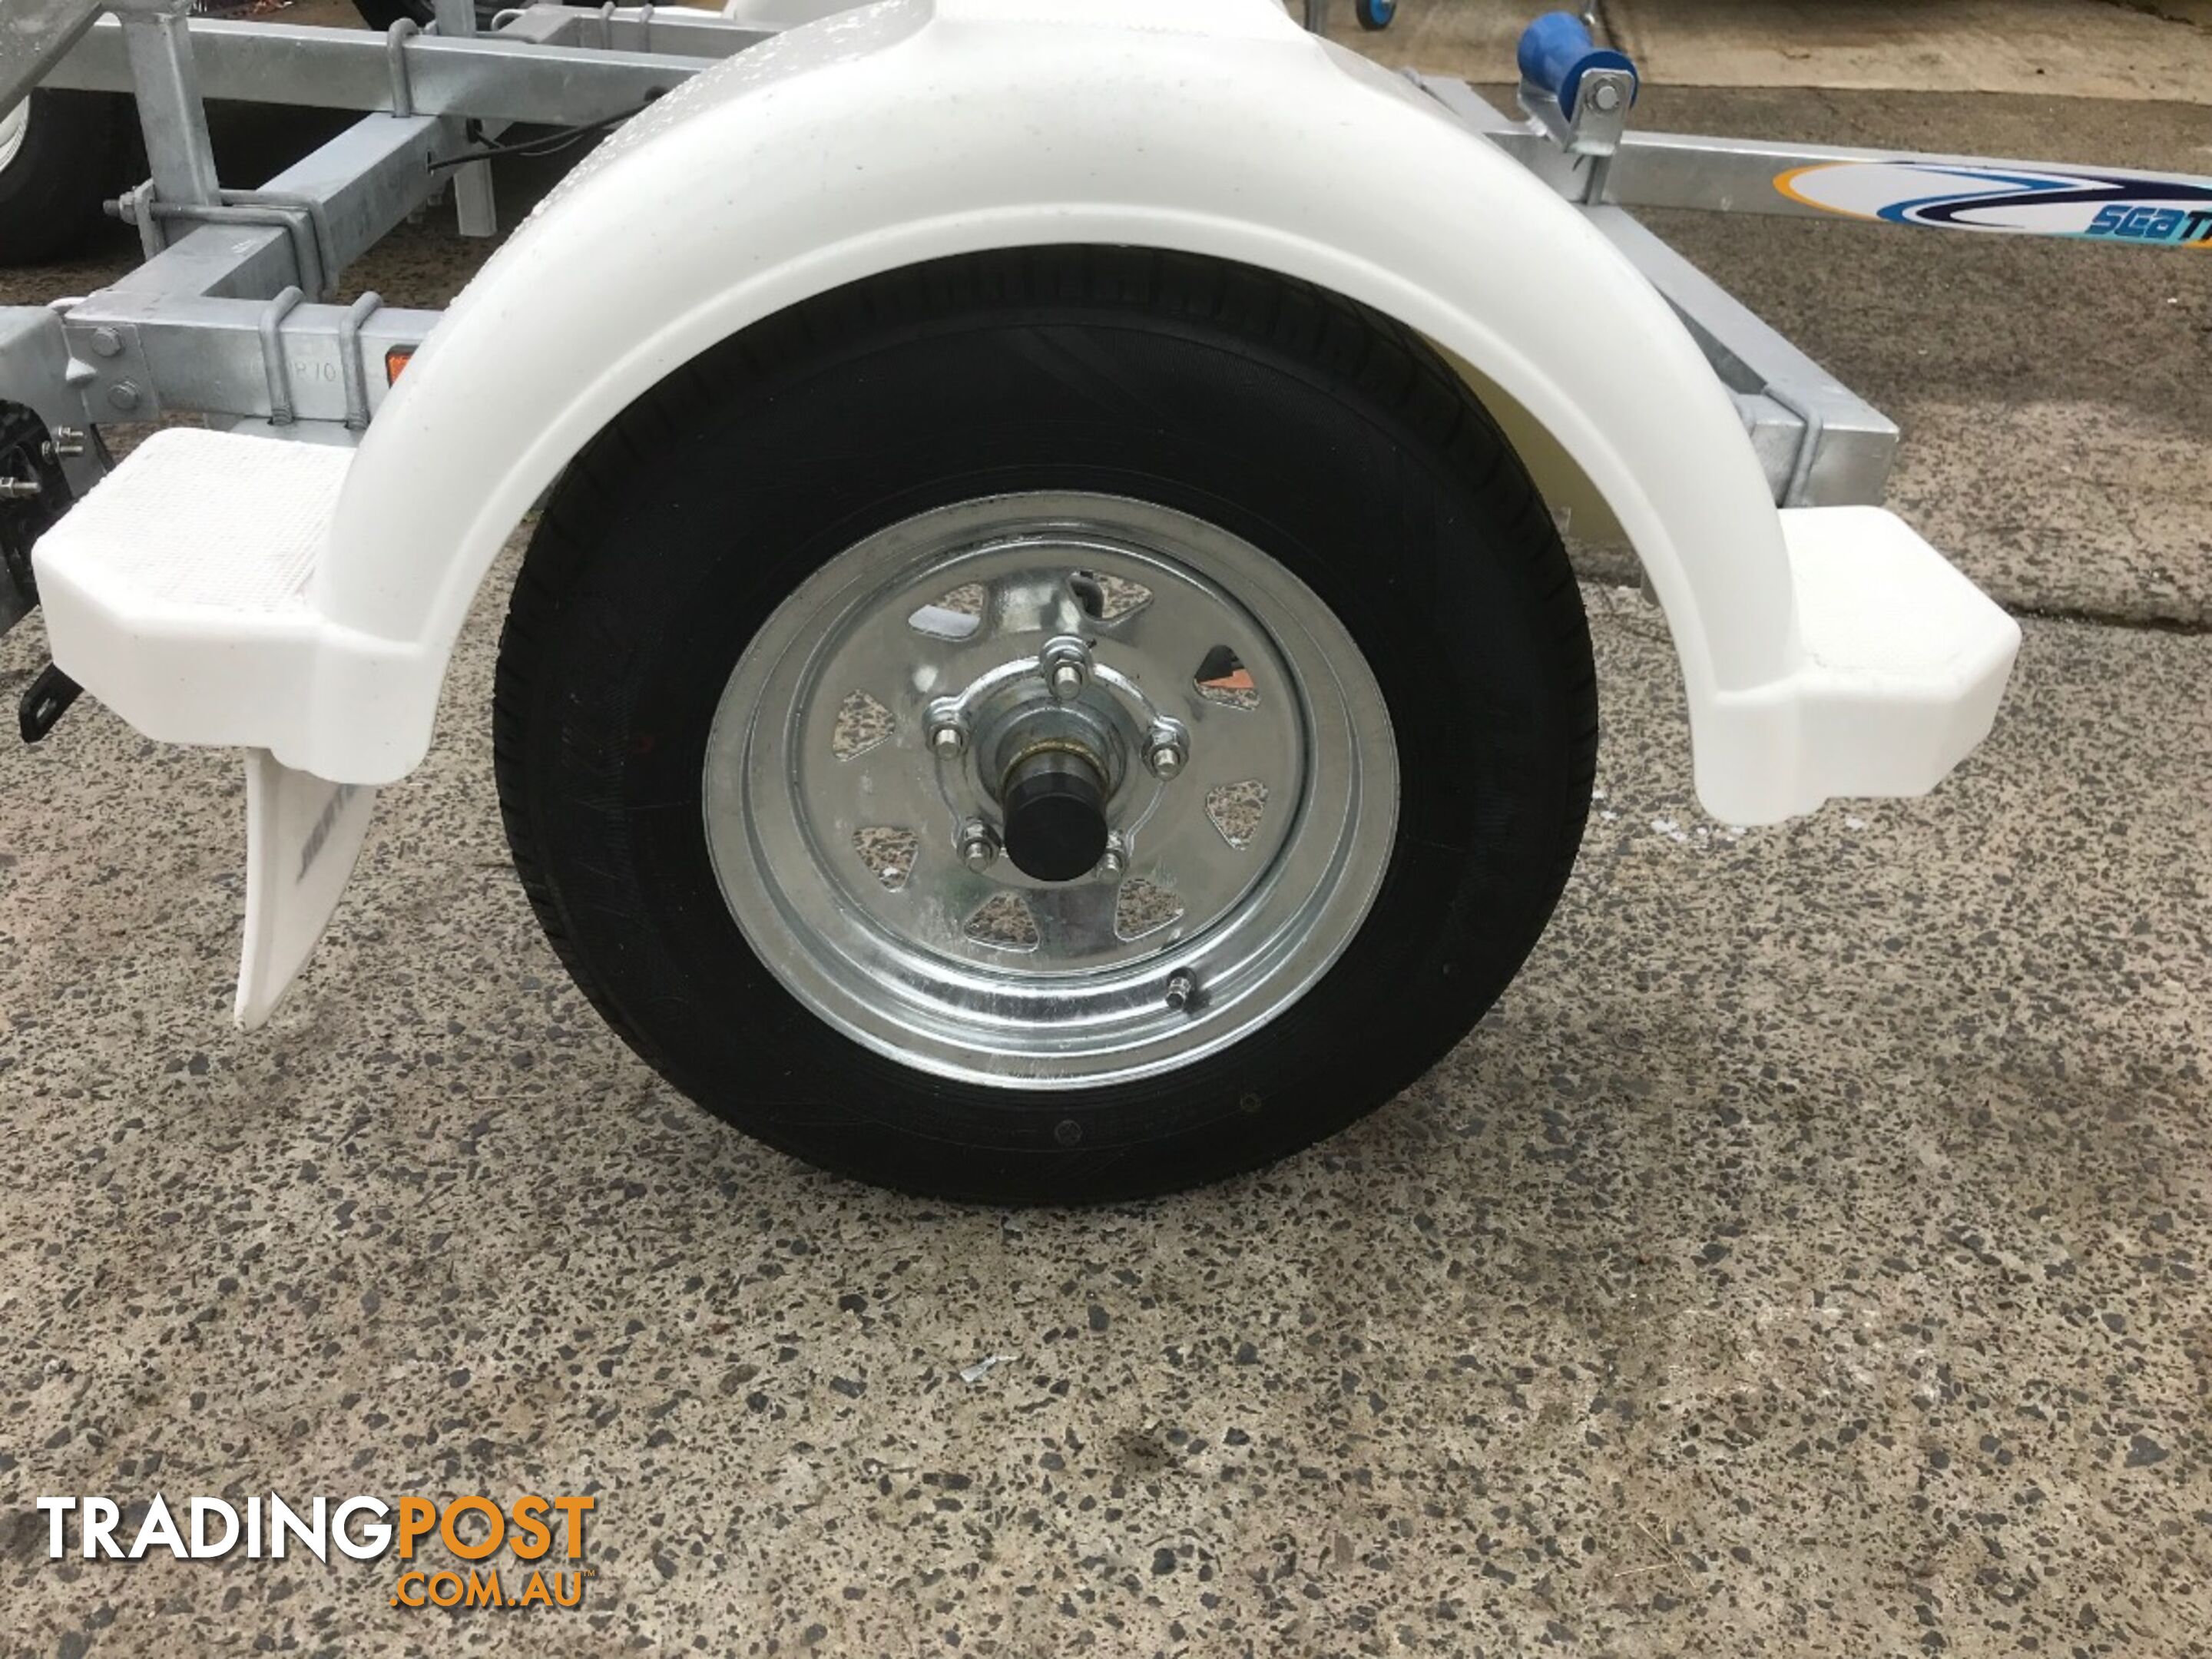 GAL BOAT TRAILER SUITS UP TO 4.0 mt ALUMINIUM HULL TARE 110 kg ATM 500 kg 